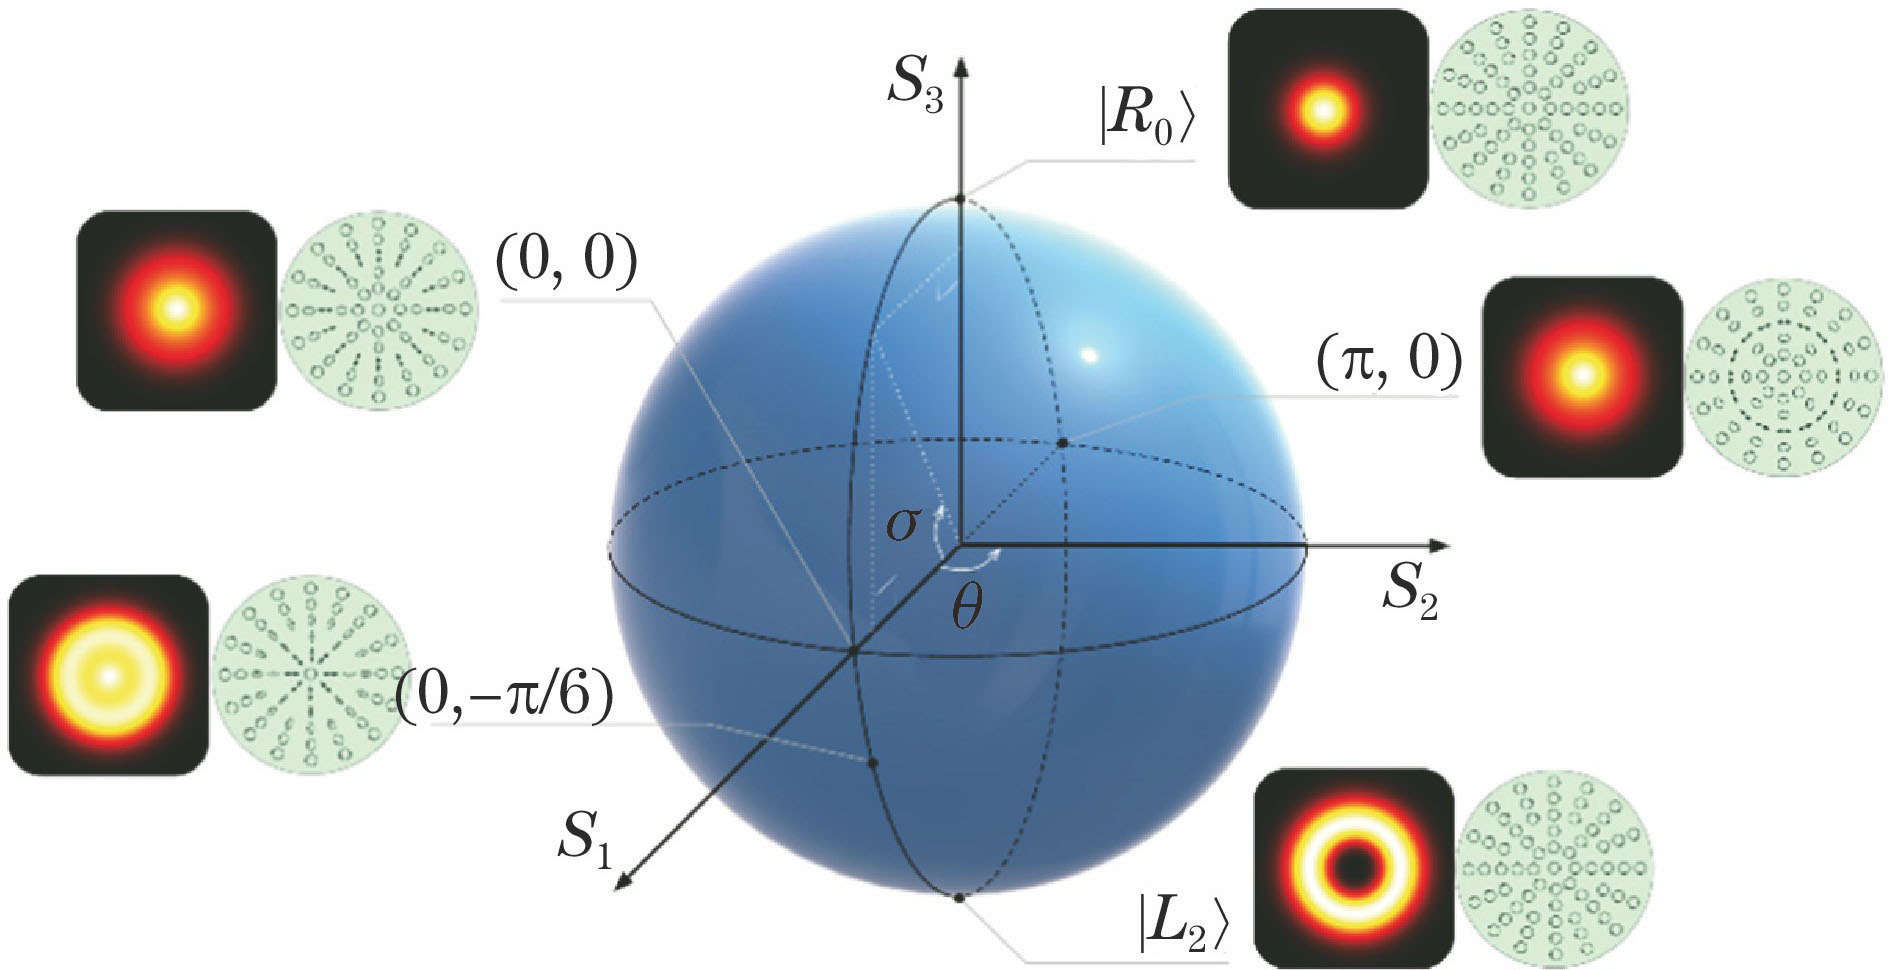 Hybrid-order Poincare sphere with m=0 and l=2